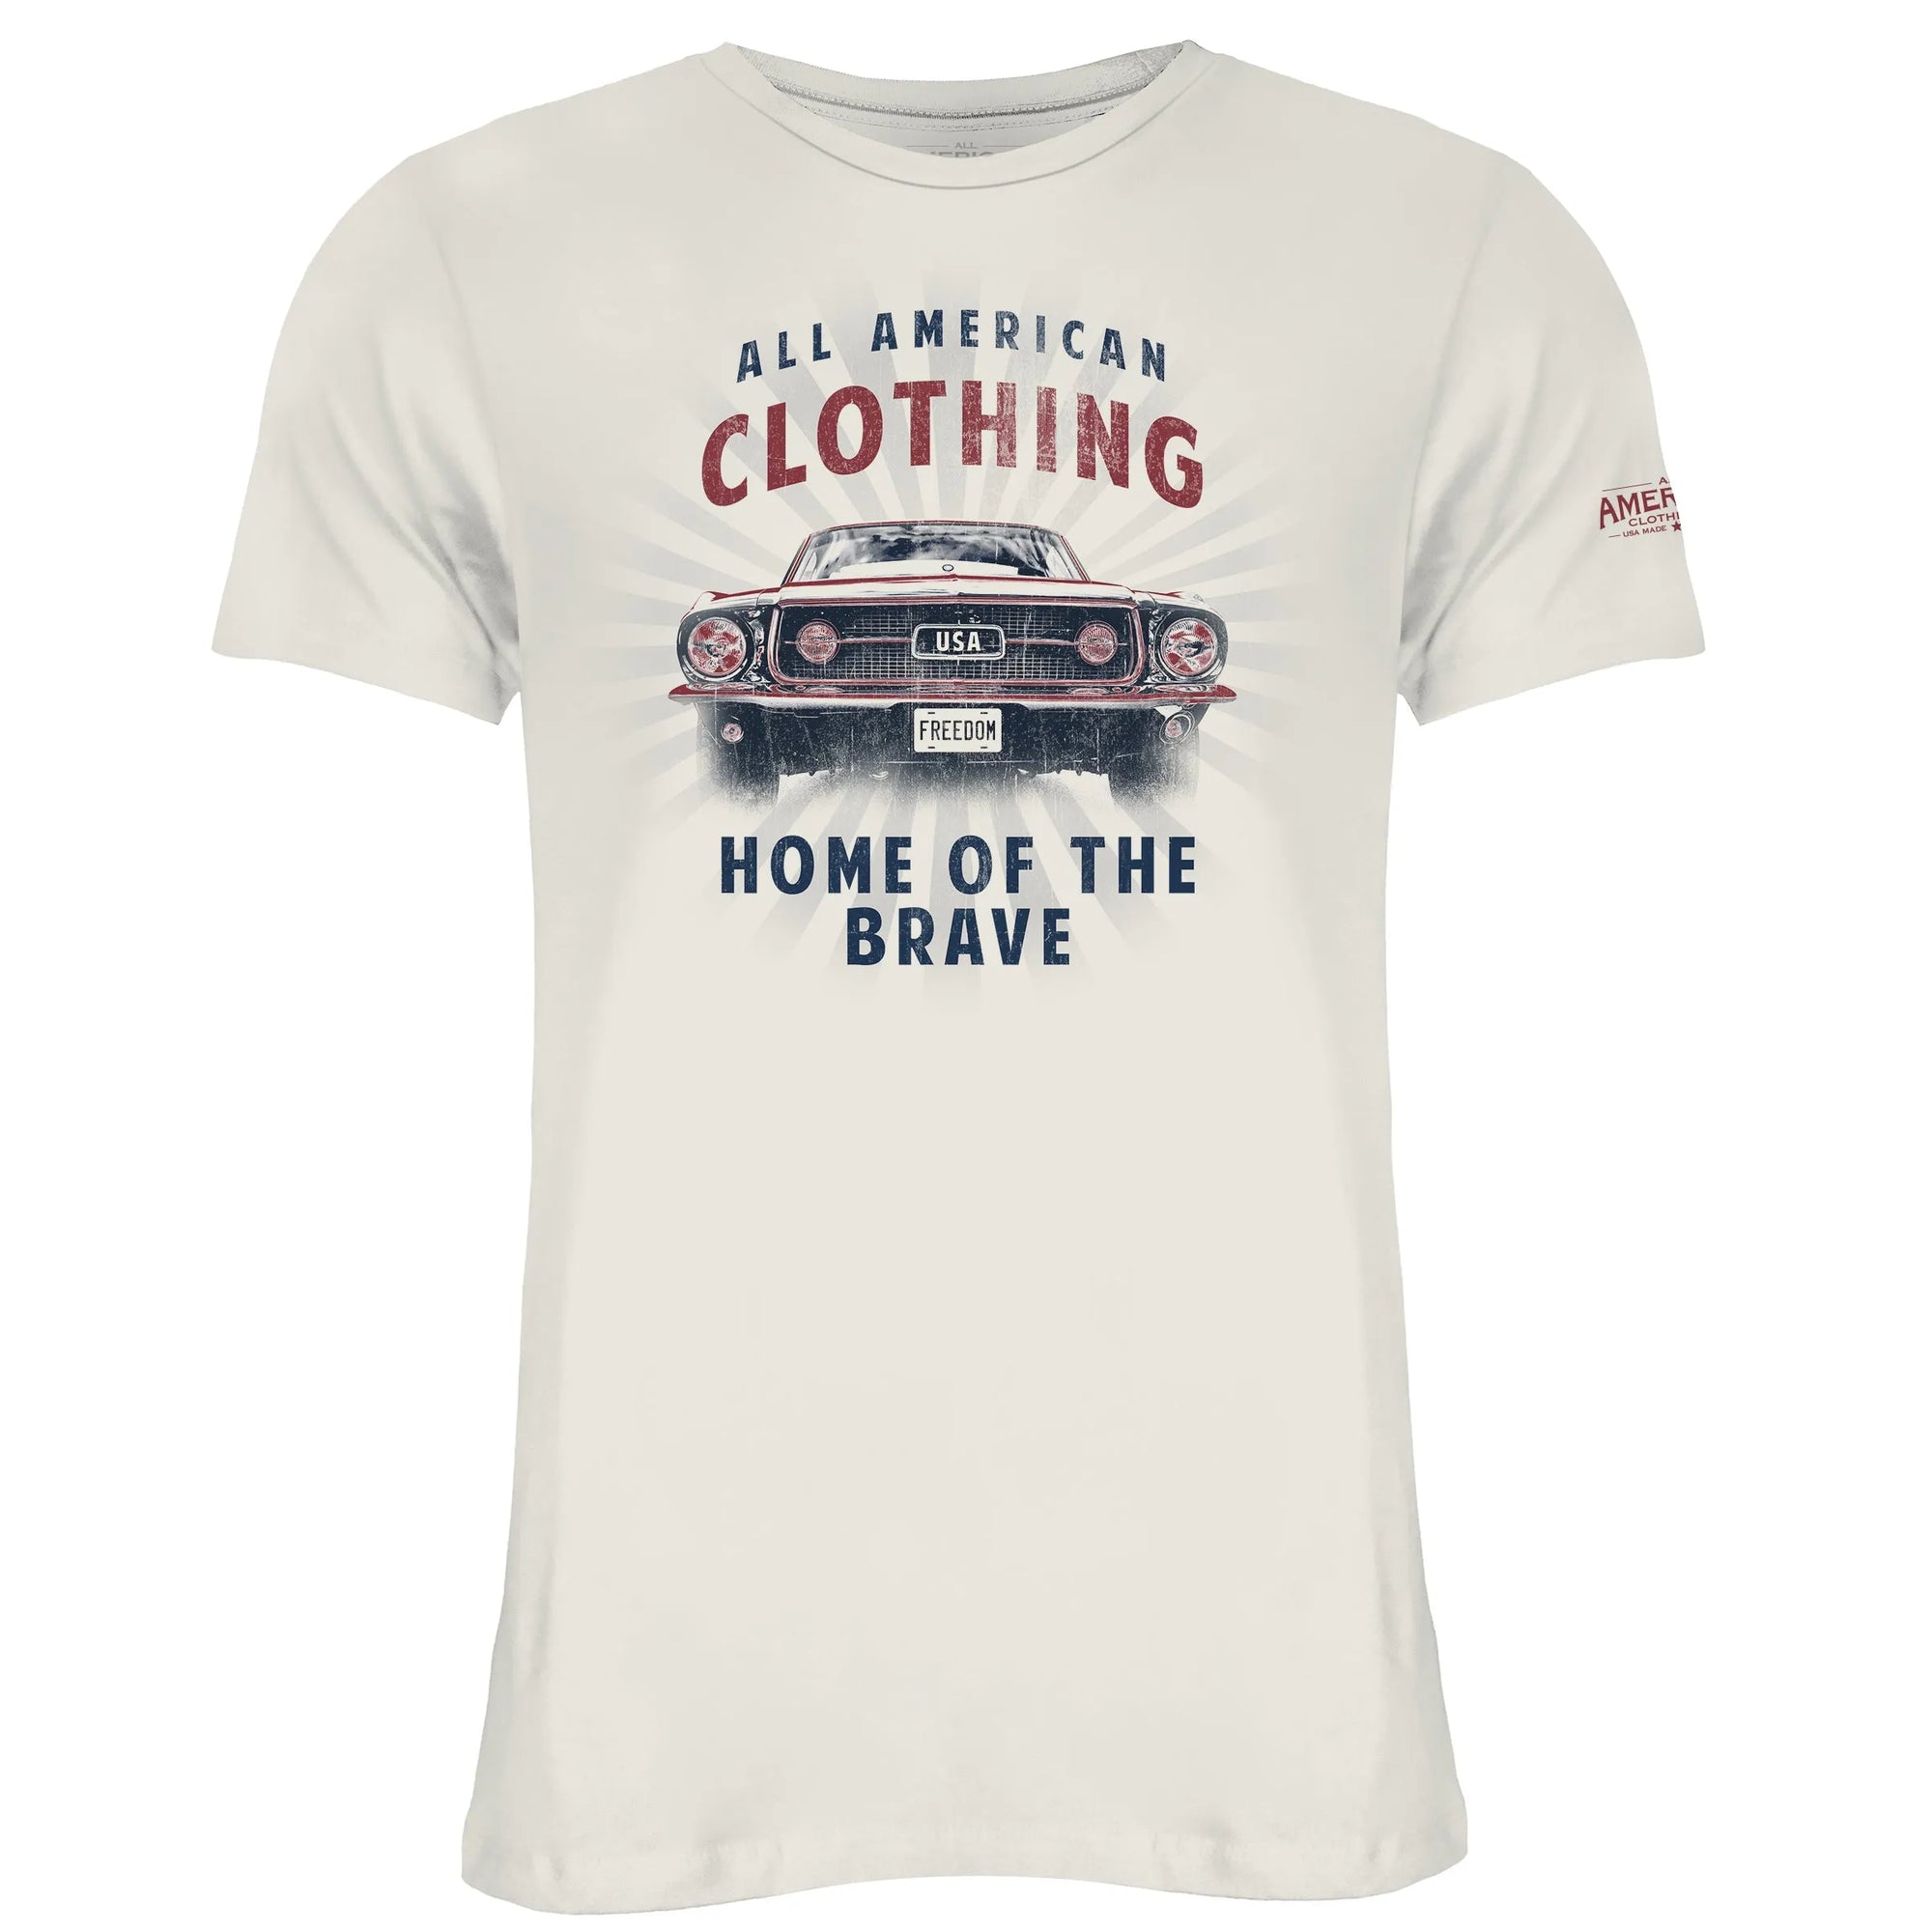 Home of the Brave Graphic T-Shirt All American Clothing Co